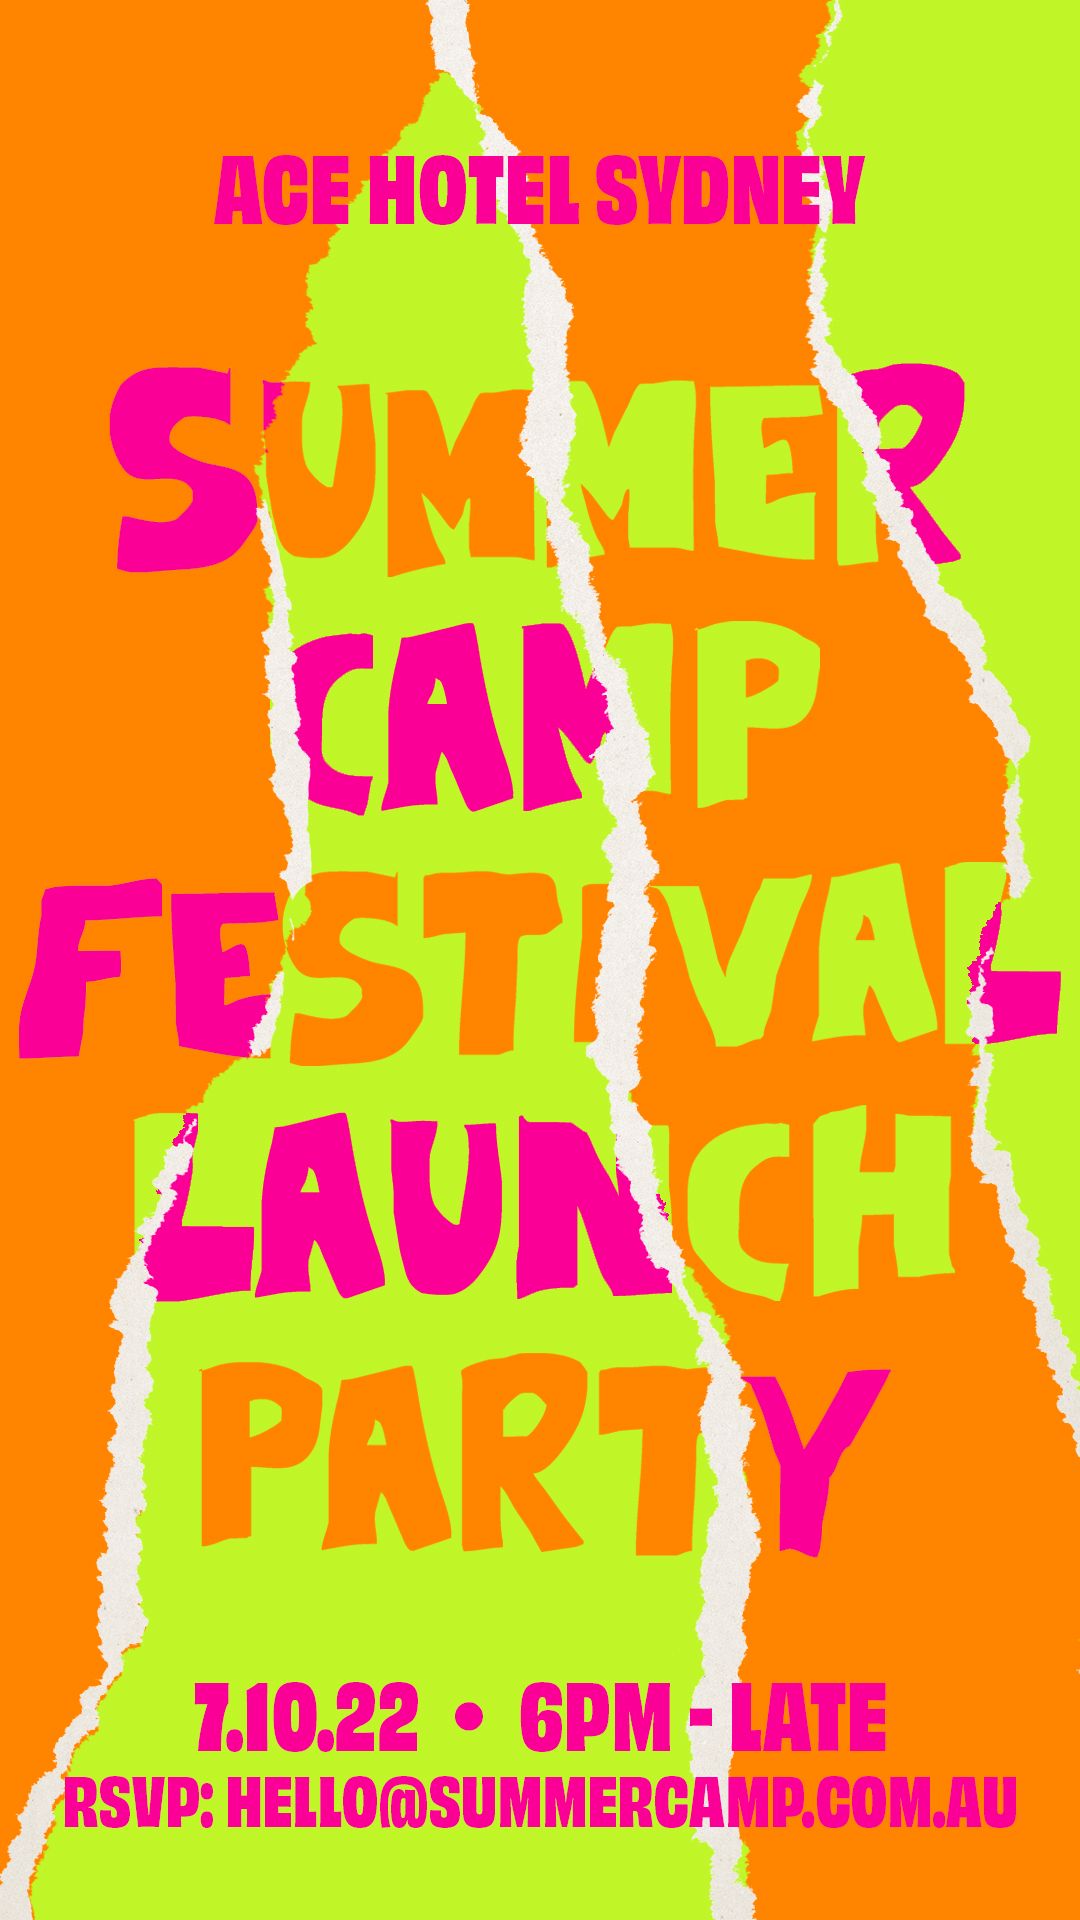 Summer Camp Festival Launch Party promo